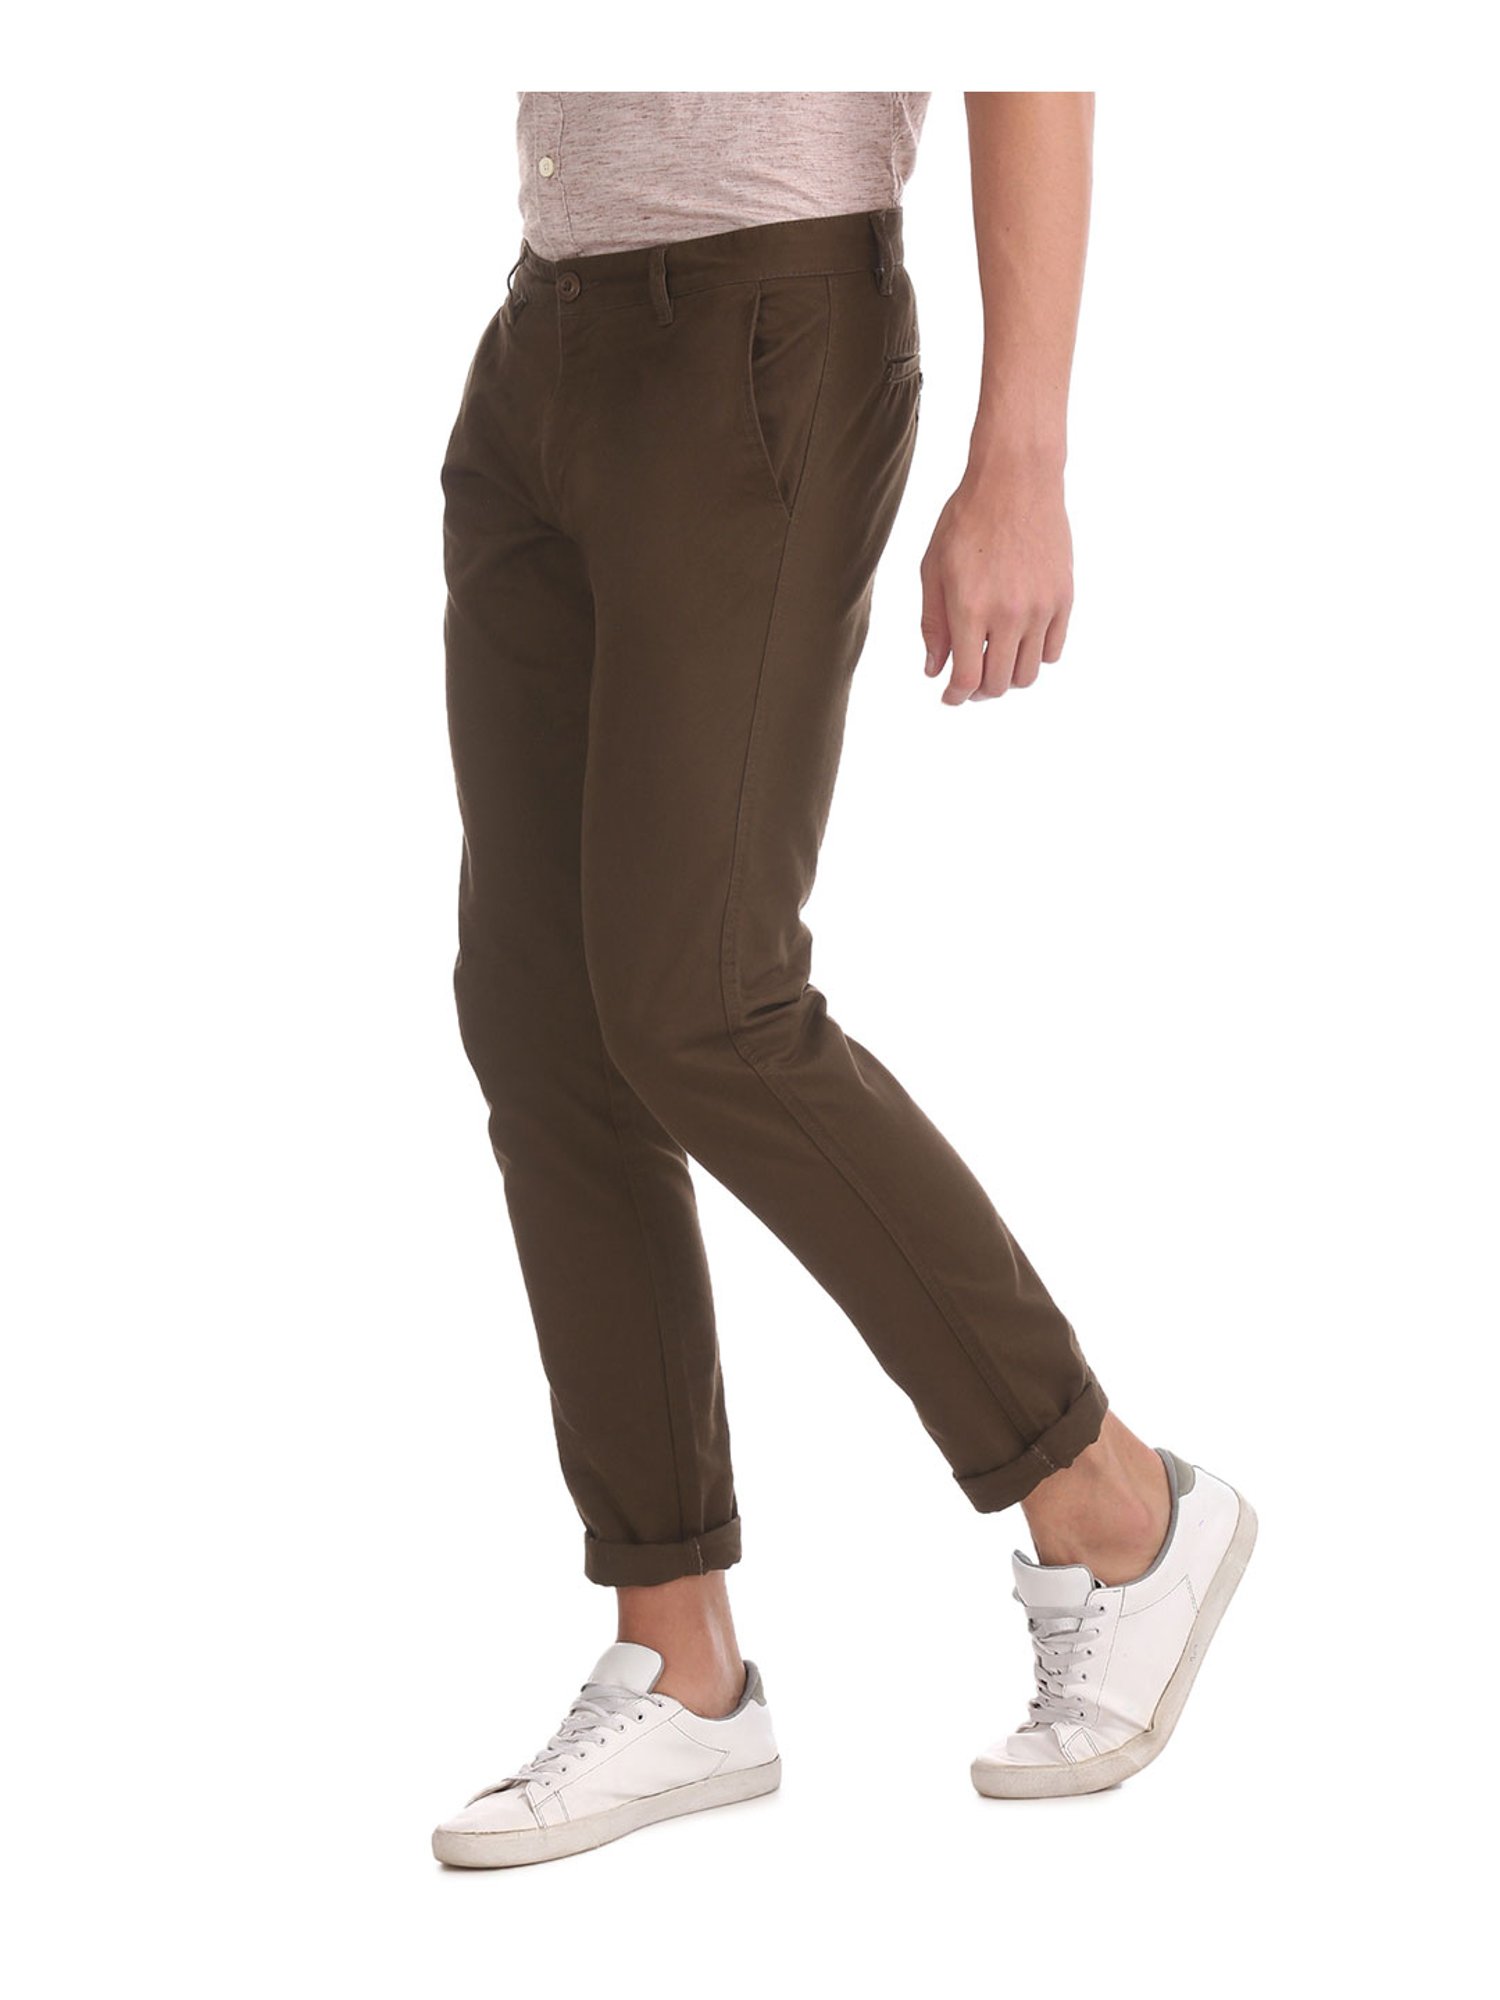 Roots by Ruggers Slim Fit Men Grey Trousers - Buy GREY Roots by Ruggers  Slim Fit Men Grey Trousers Online at Best Prices in India | Flipkart.com